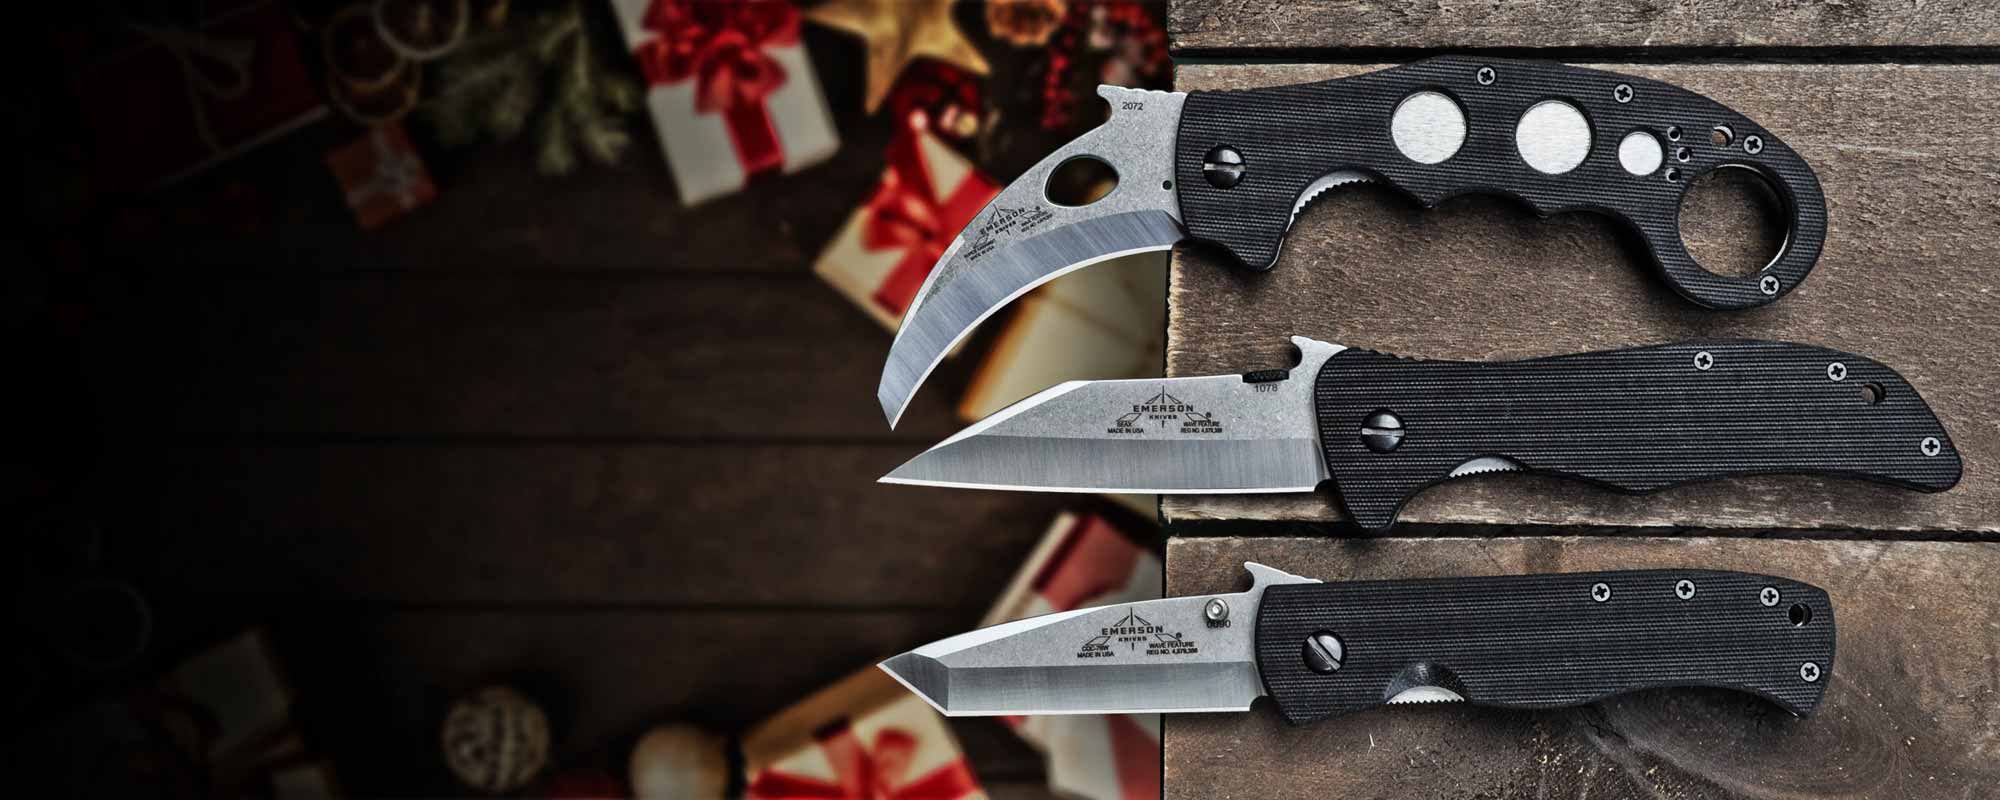 2023 Trade Show Left Overs Clearance Knife Sale - Discounts! 